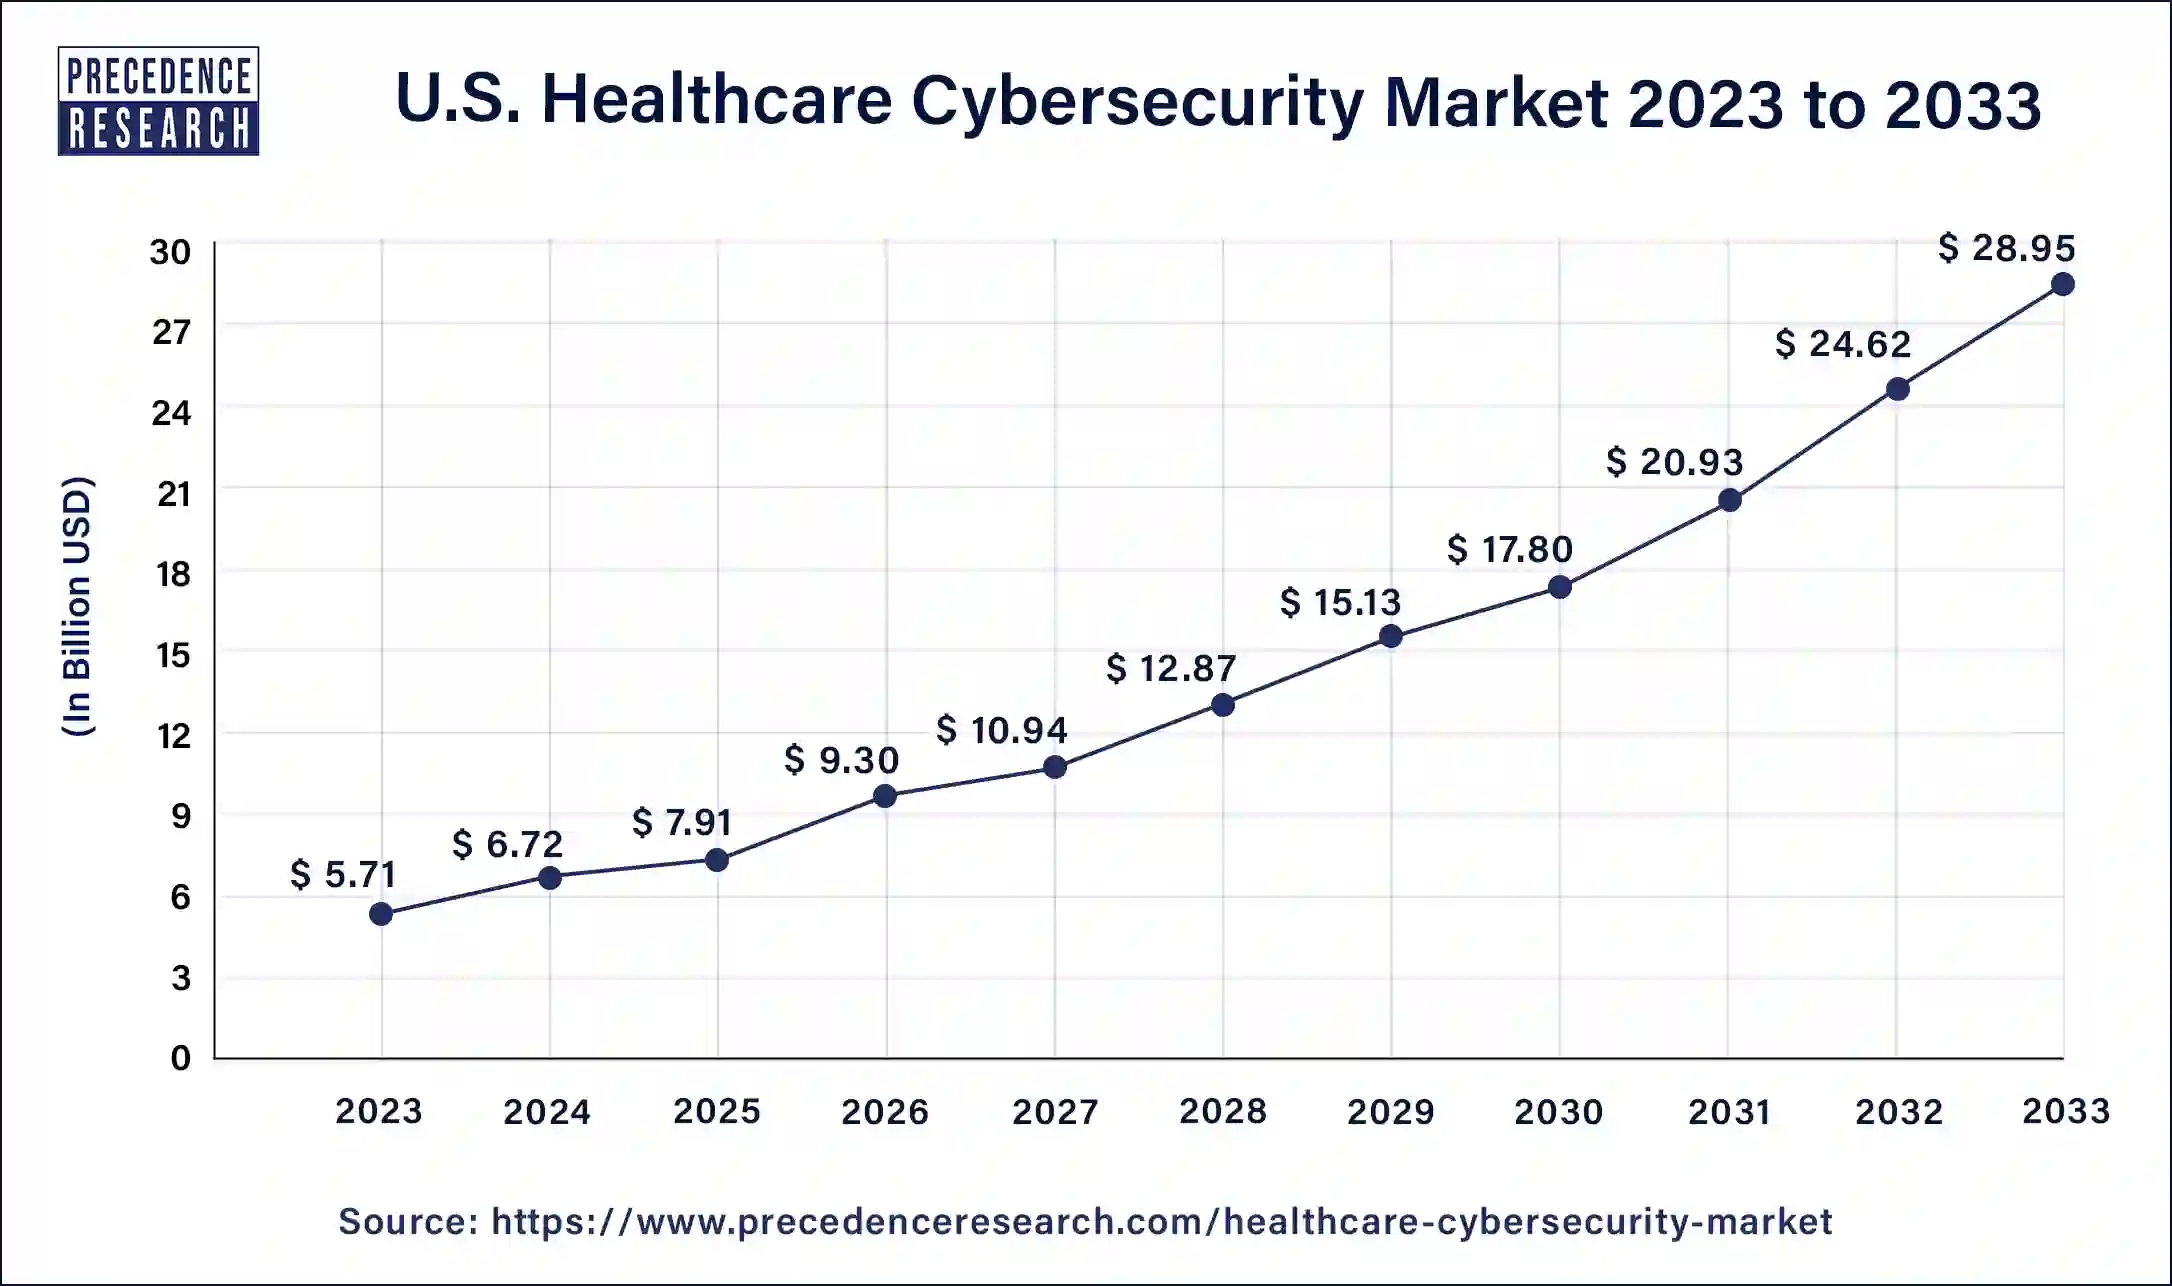 U.S. Healthcare Cybersecurity Market Size 2024 to 2033